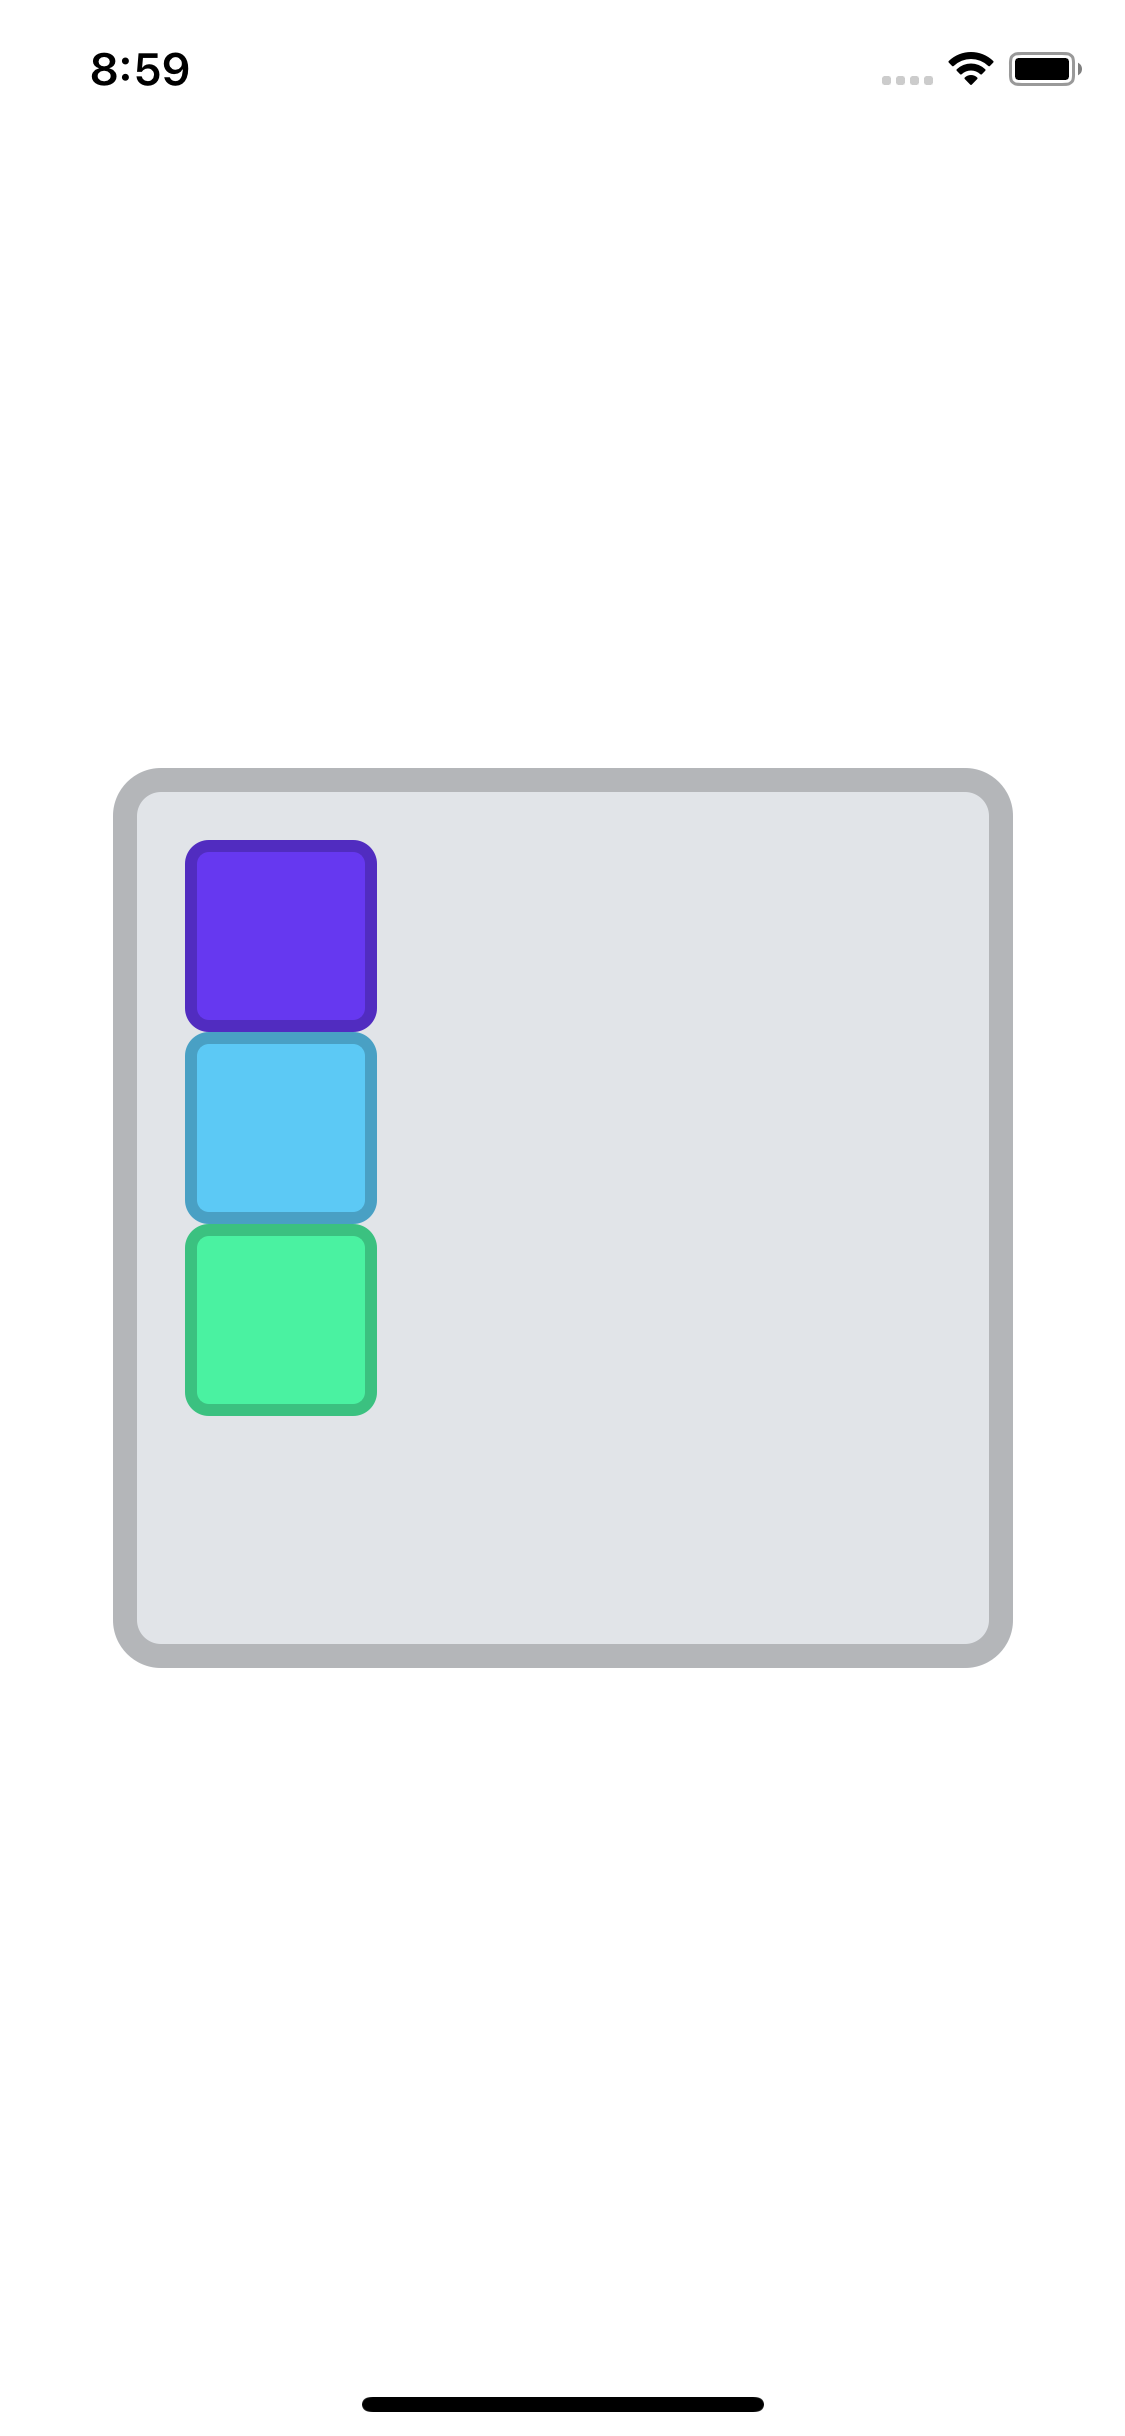 Three square components in a square parent container